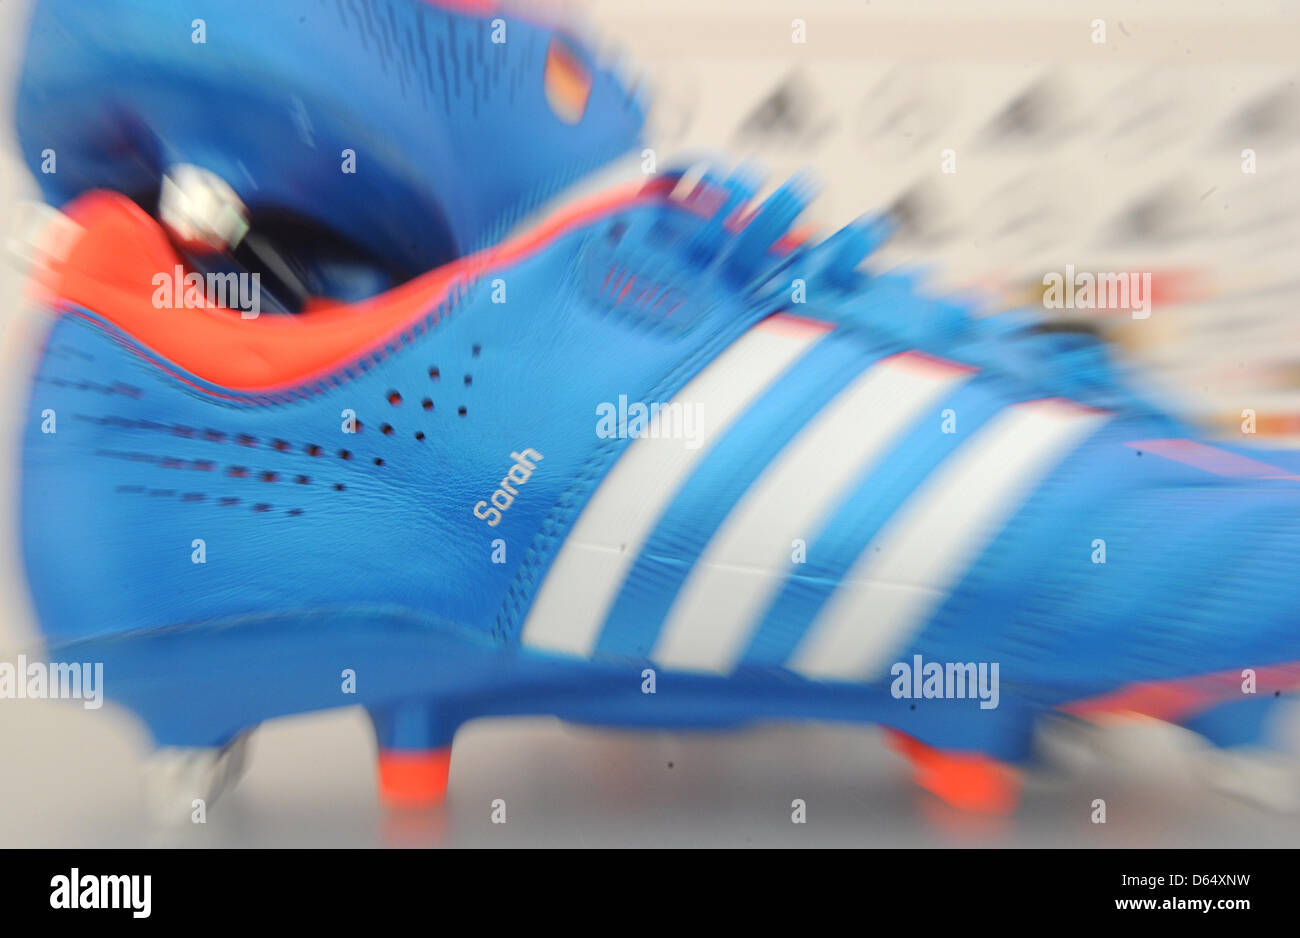 Bastian Schweinsteiger's soccer shoes stand on a table during a press  conference of Adidas at hotel Dwor Oliwski in Gdansk, Poland, 6 June 2012.  The UEFA EURO 2012 will take place from